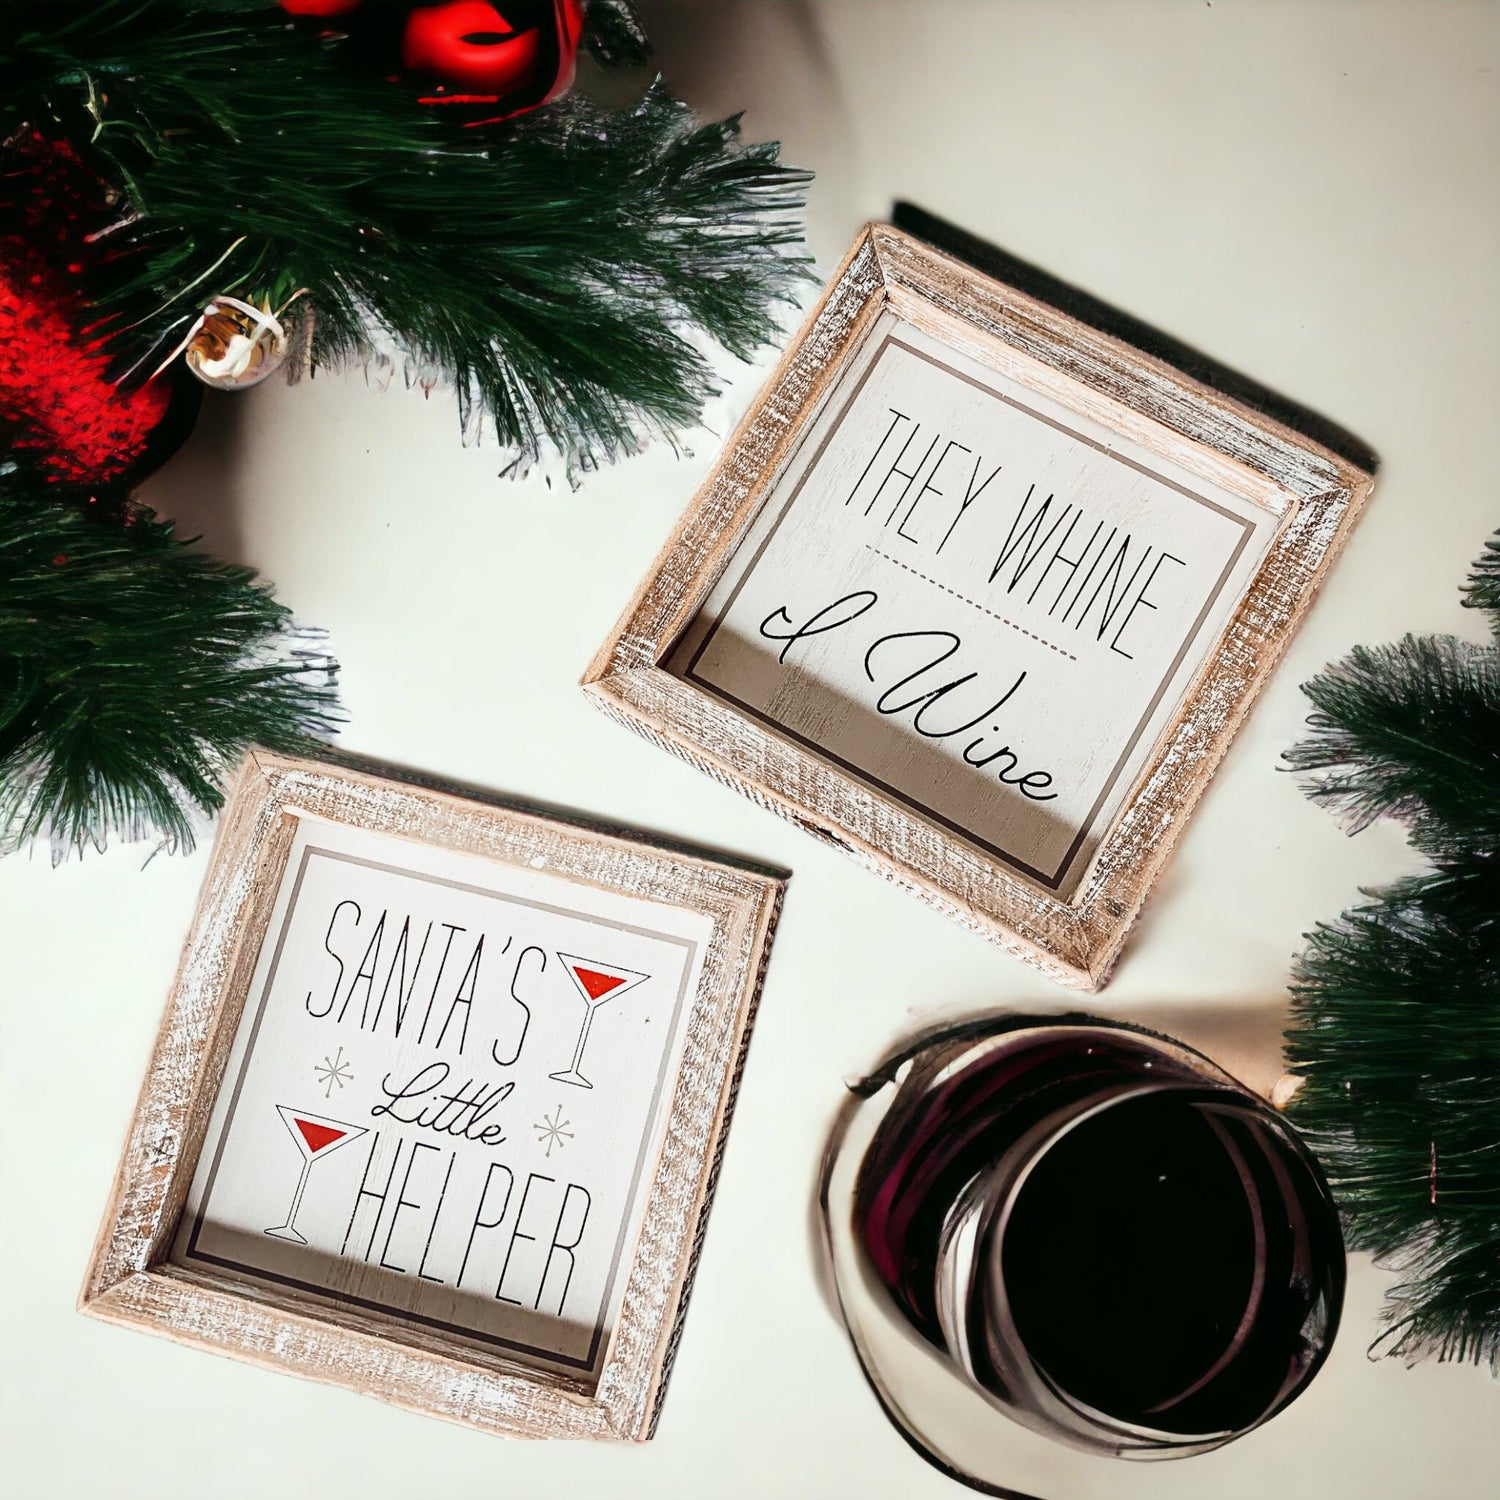 Christmas wine quotes, farmhouse christmas decorations